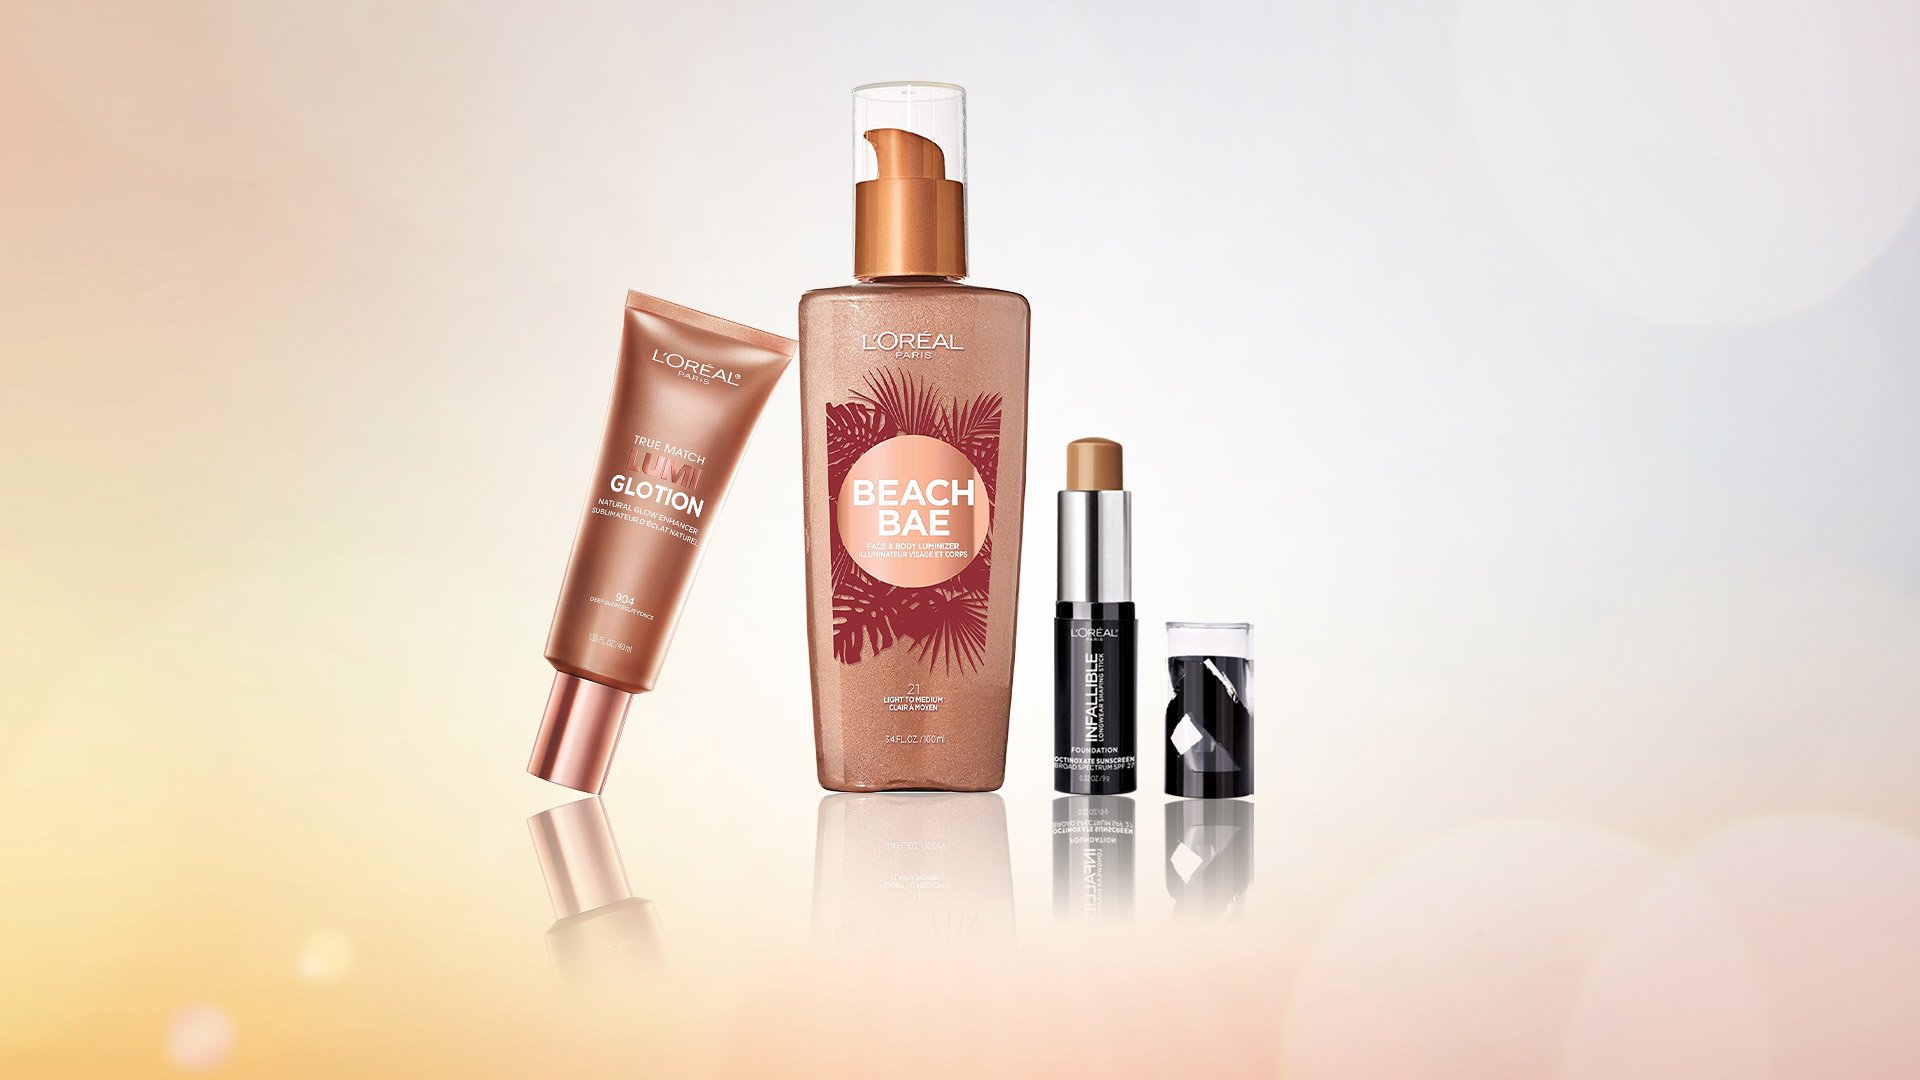 Loreal Paris Article These Cream Bronzers and Contours Are a Must for Summer D